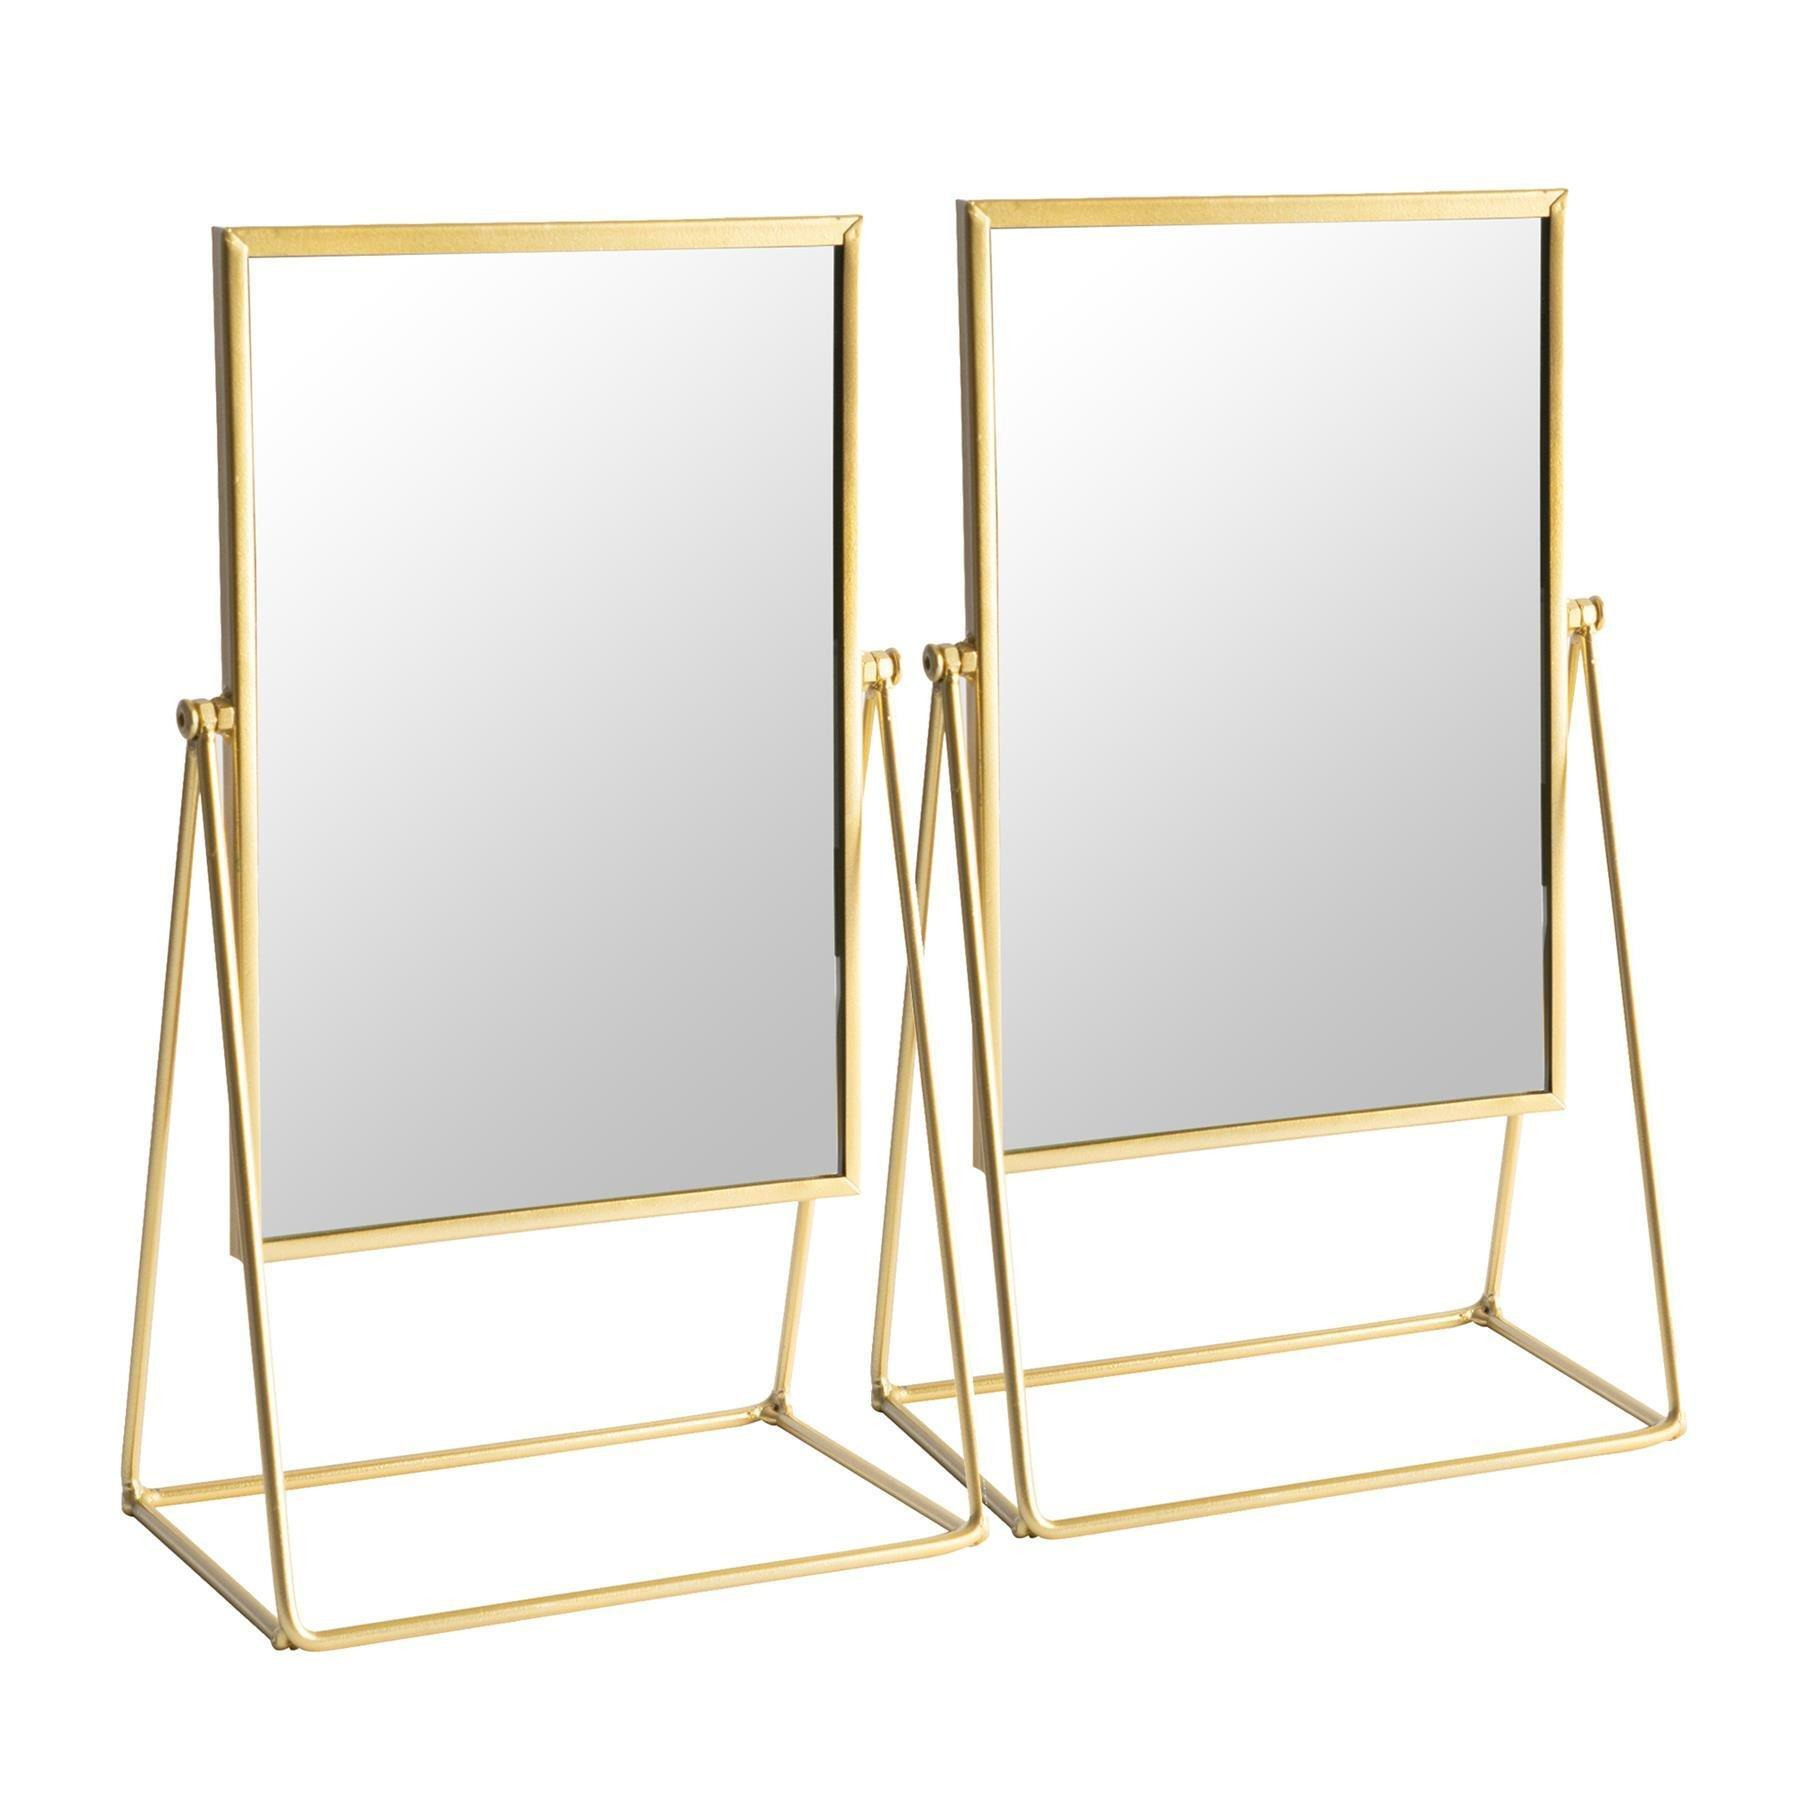 32 x 50cm Rectangle Makeup Mirrors Pack of 2 - image 1